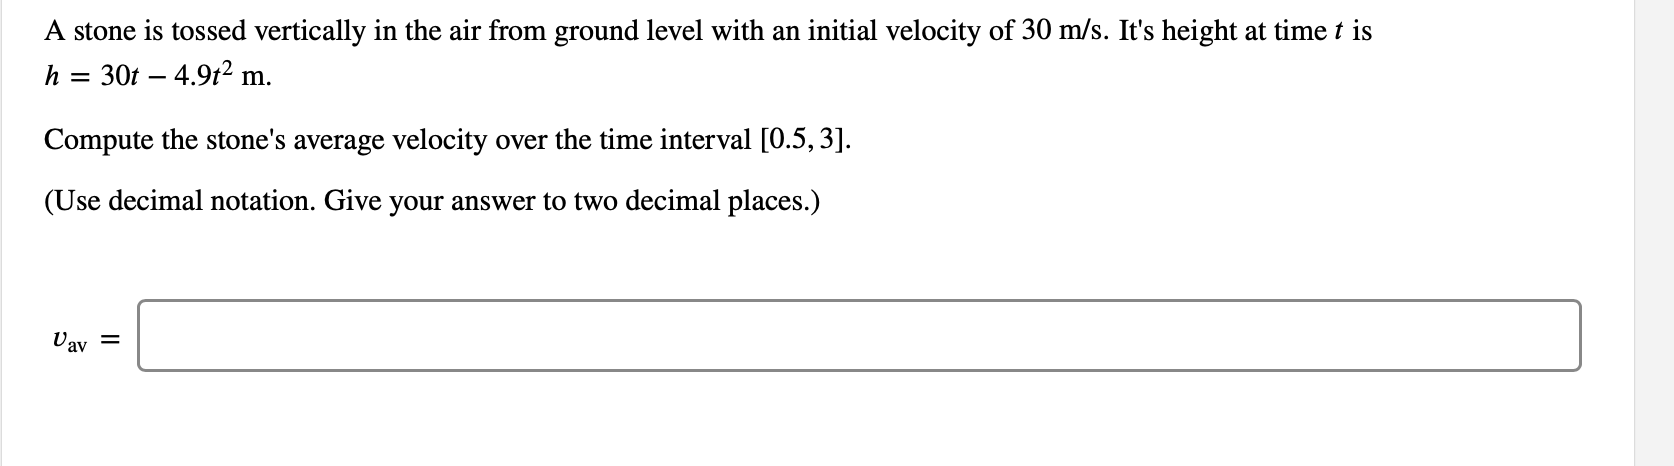 A stone is tossed vertically in the air from ground level with an initial velocity of 30 m/s. It's height at time t is
30t 4.92 m
h
Compute the stone's average velocity over the time interval [0.5,3].
(Use decimal notation. Give your answer to two decimal places.)
Uav
